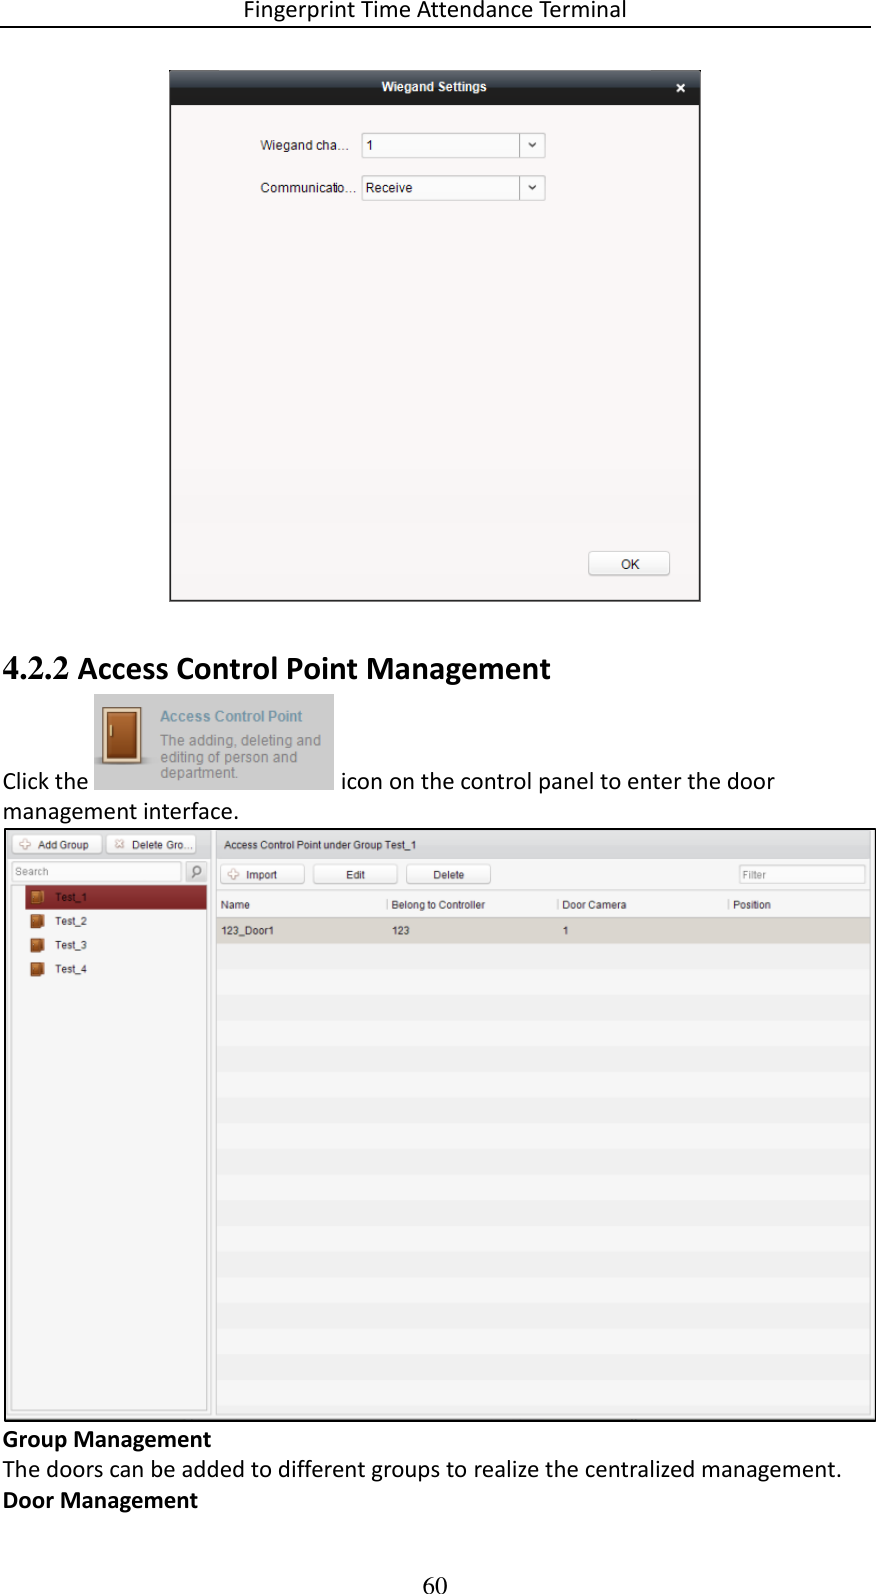 Fingerprint Time Attendance Terminal 60   4.2.2 Access Control Point Management Click the   icon on the control panel to enter the door management interface.  Group Management The doors can be added to different groups to realize the centralized management. Door Management 